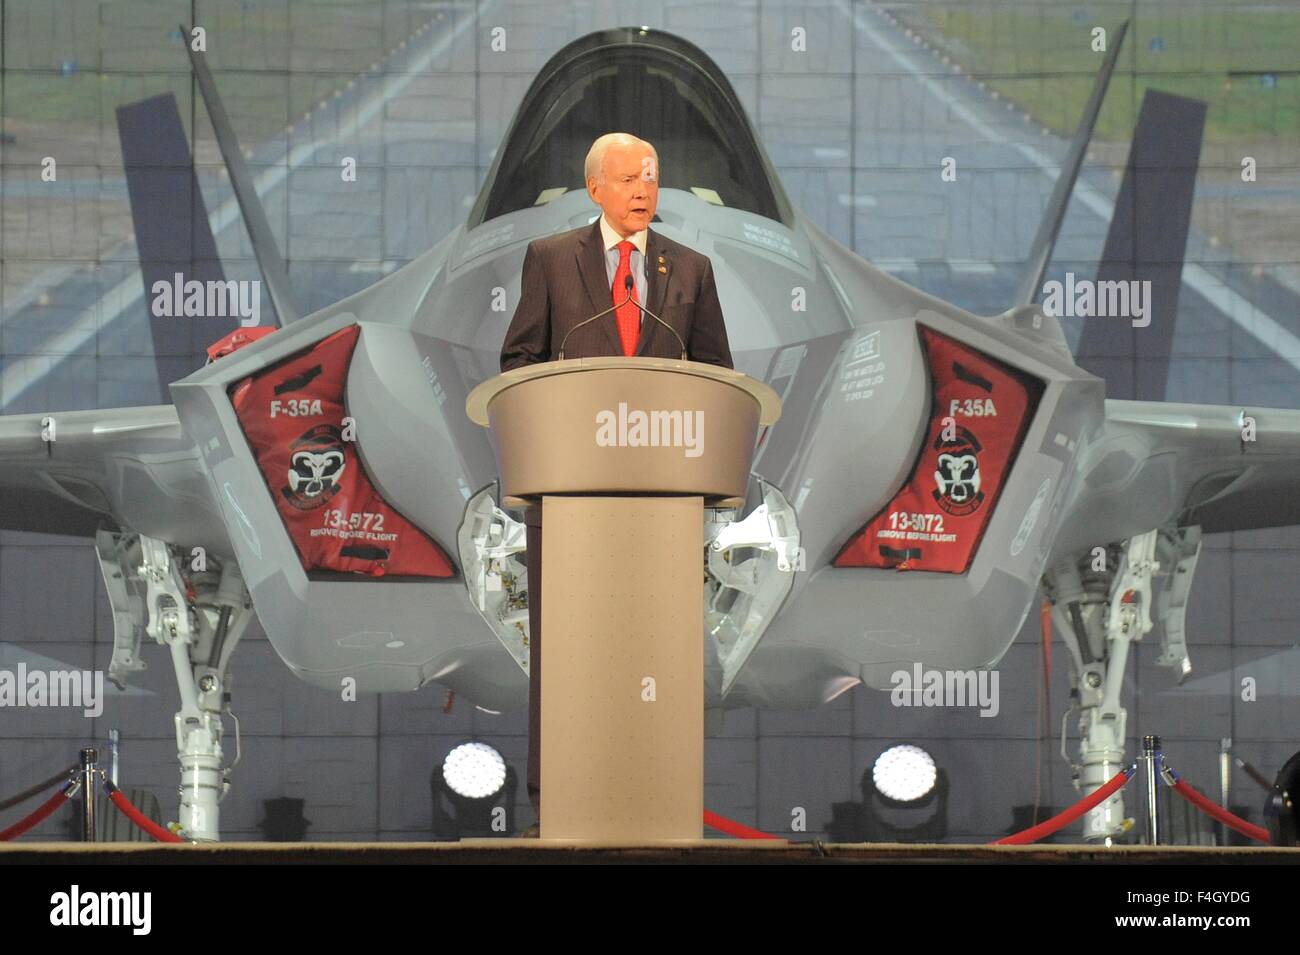 Utah Senator Orrin Hatch speaks at the F-35 Lightening II fighter aircraft unveiling ceremony at Hill Air Force Base October 14, 2015 in Ogden, Utah. The base is the home of the 34th Fighter Squadron which is the first operational Air Force unit to fly combat-coded F-35 fighters. Stock Photo